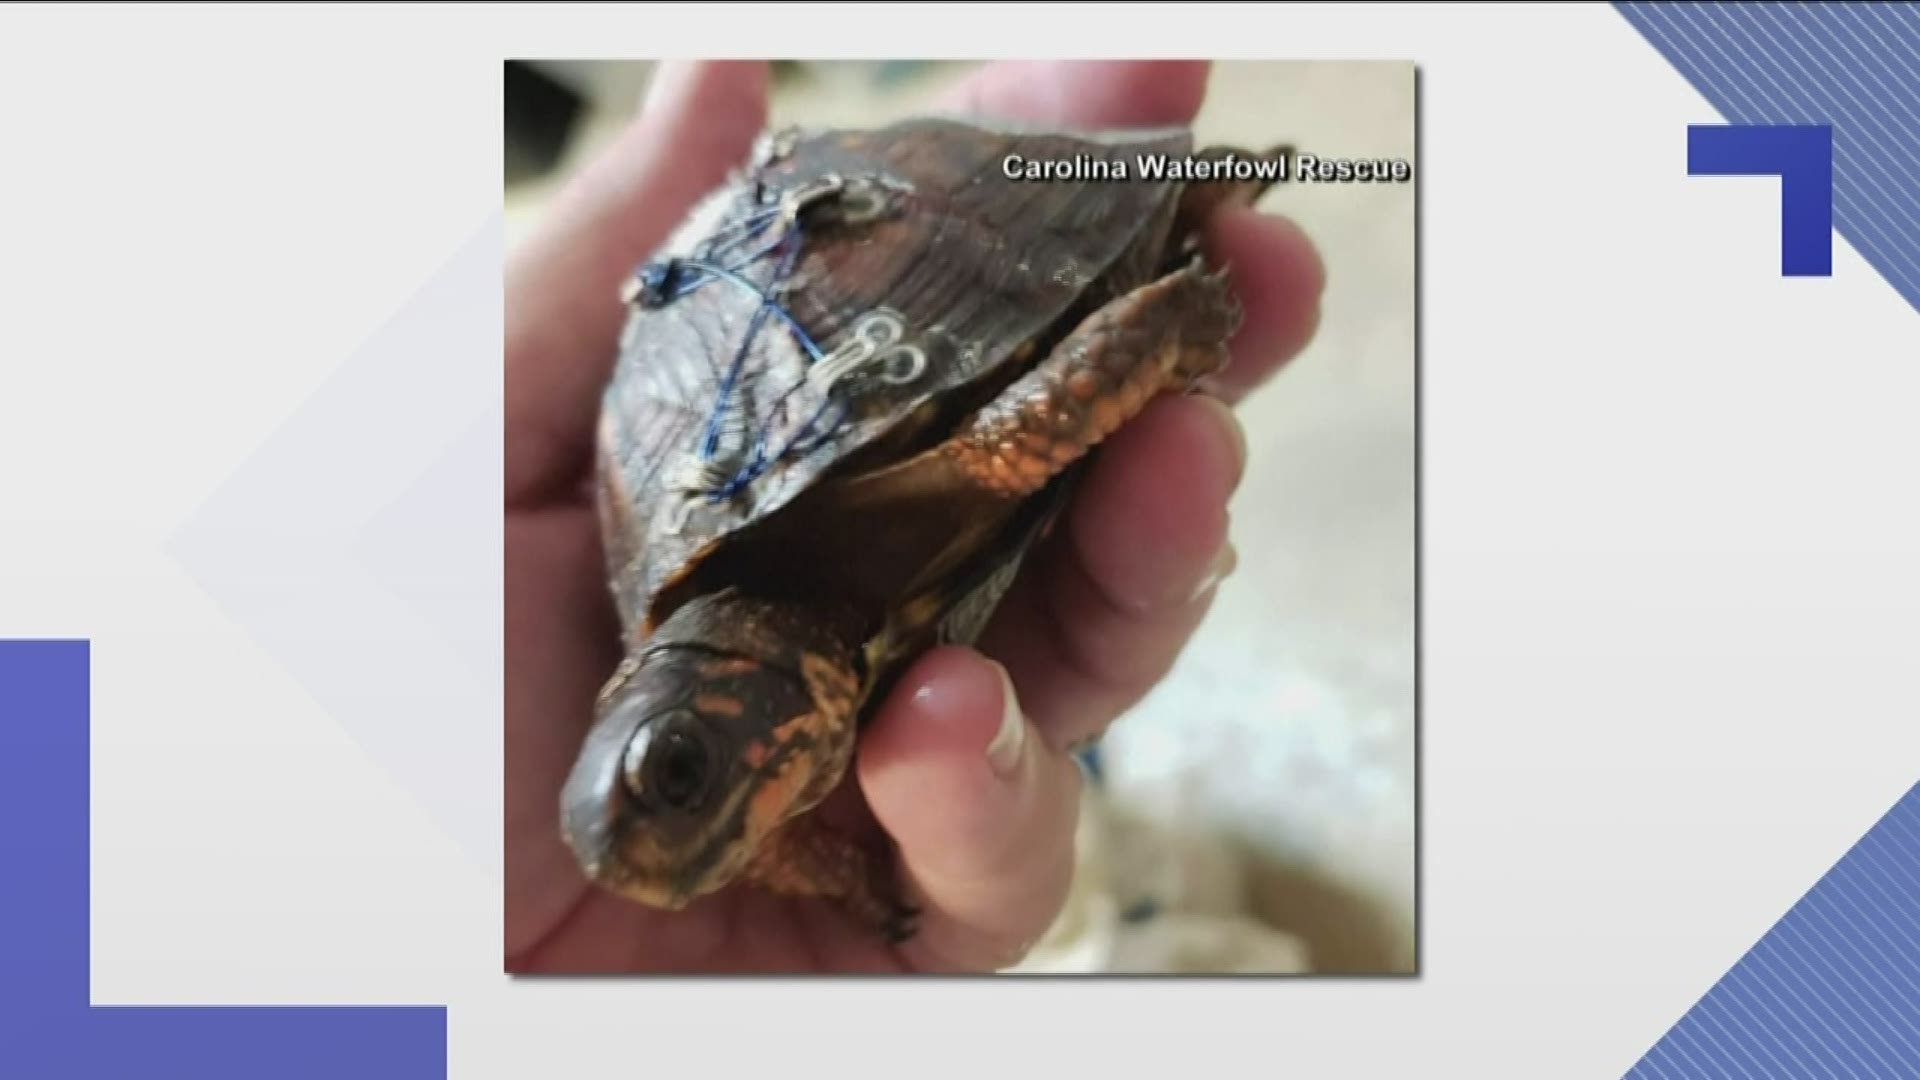 A North Carolina animal rescue group is appealing to women not to throw out their old bras, but instead to send them to their agency to help turtles with broken shells.